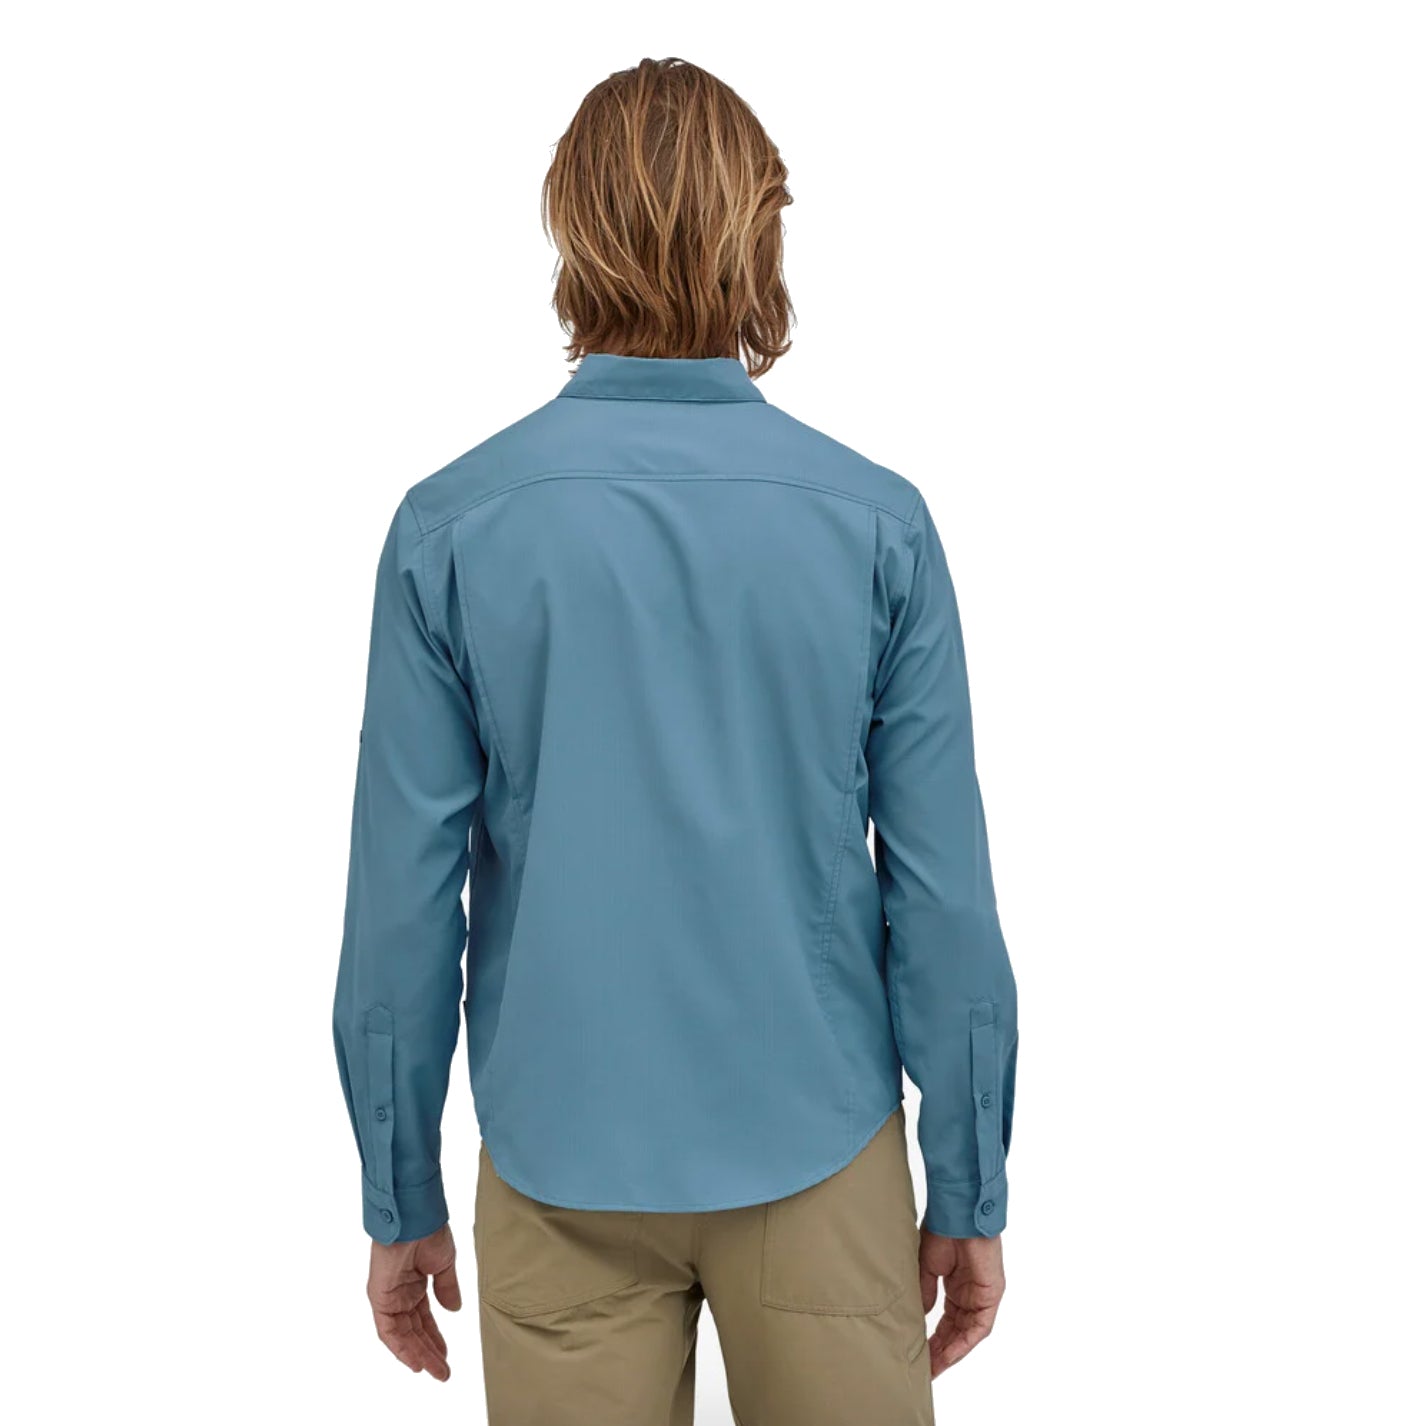 patagonia men's long sleeved self guided hiking shirt in pigeon blue on model back view